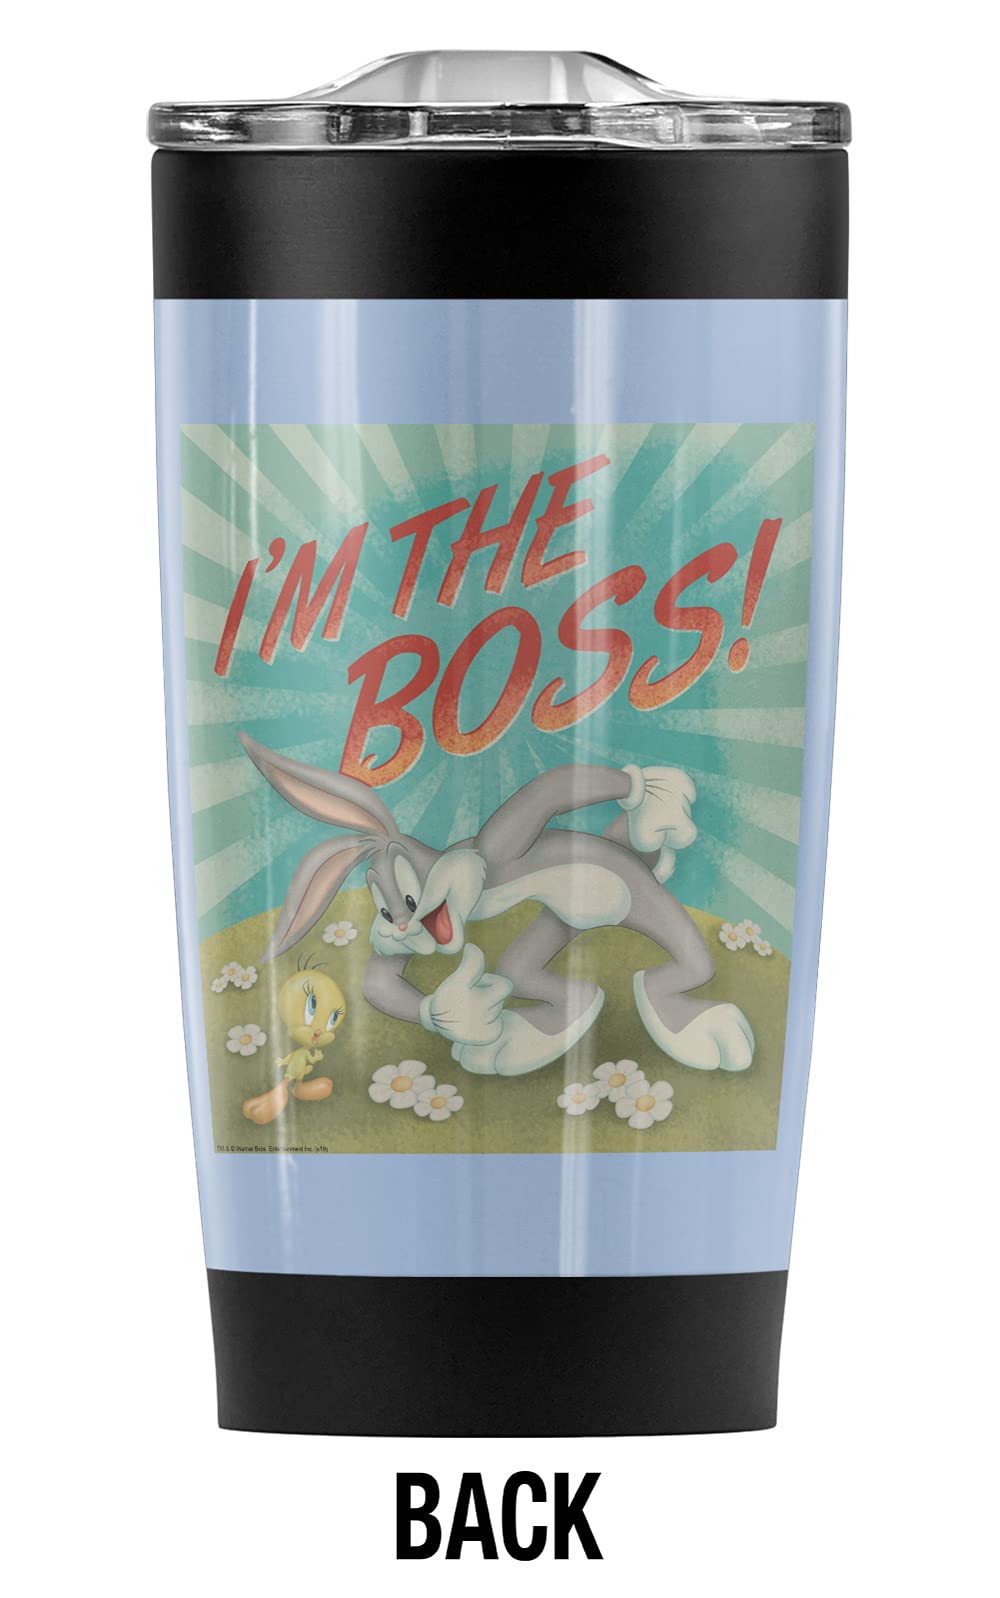 Looney Tunes Bugs Bunny I'm The Boss Stainless Steel Tumbler 20 oz Coffee Travel Mug/Cup, Vacuum Insulated & Double Wall with Leakproof Sliding Lid | Great for Hot Drinks and Cold Beverages